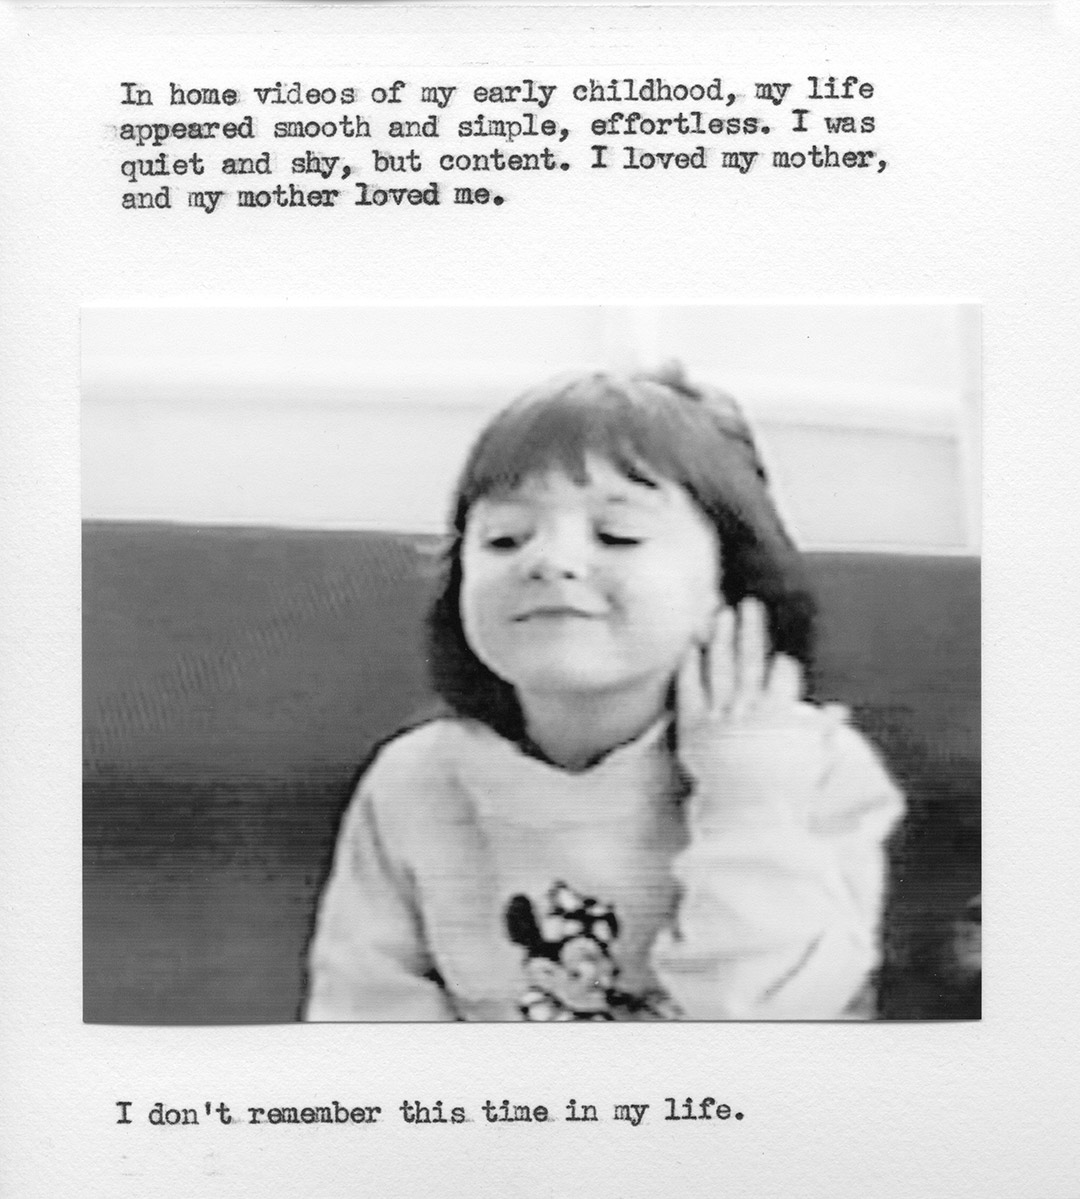 A photo of a child smiling, wearing a Minnie Mouse shirt. The text reads: “In home videos of my early childhood, my life appeared smooth and simple, effortless. I was quiet and shy, but content. I loved my mother, and my mother loved me. I do not remember this time in my life.”